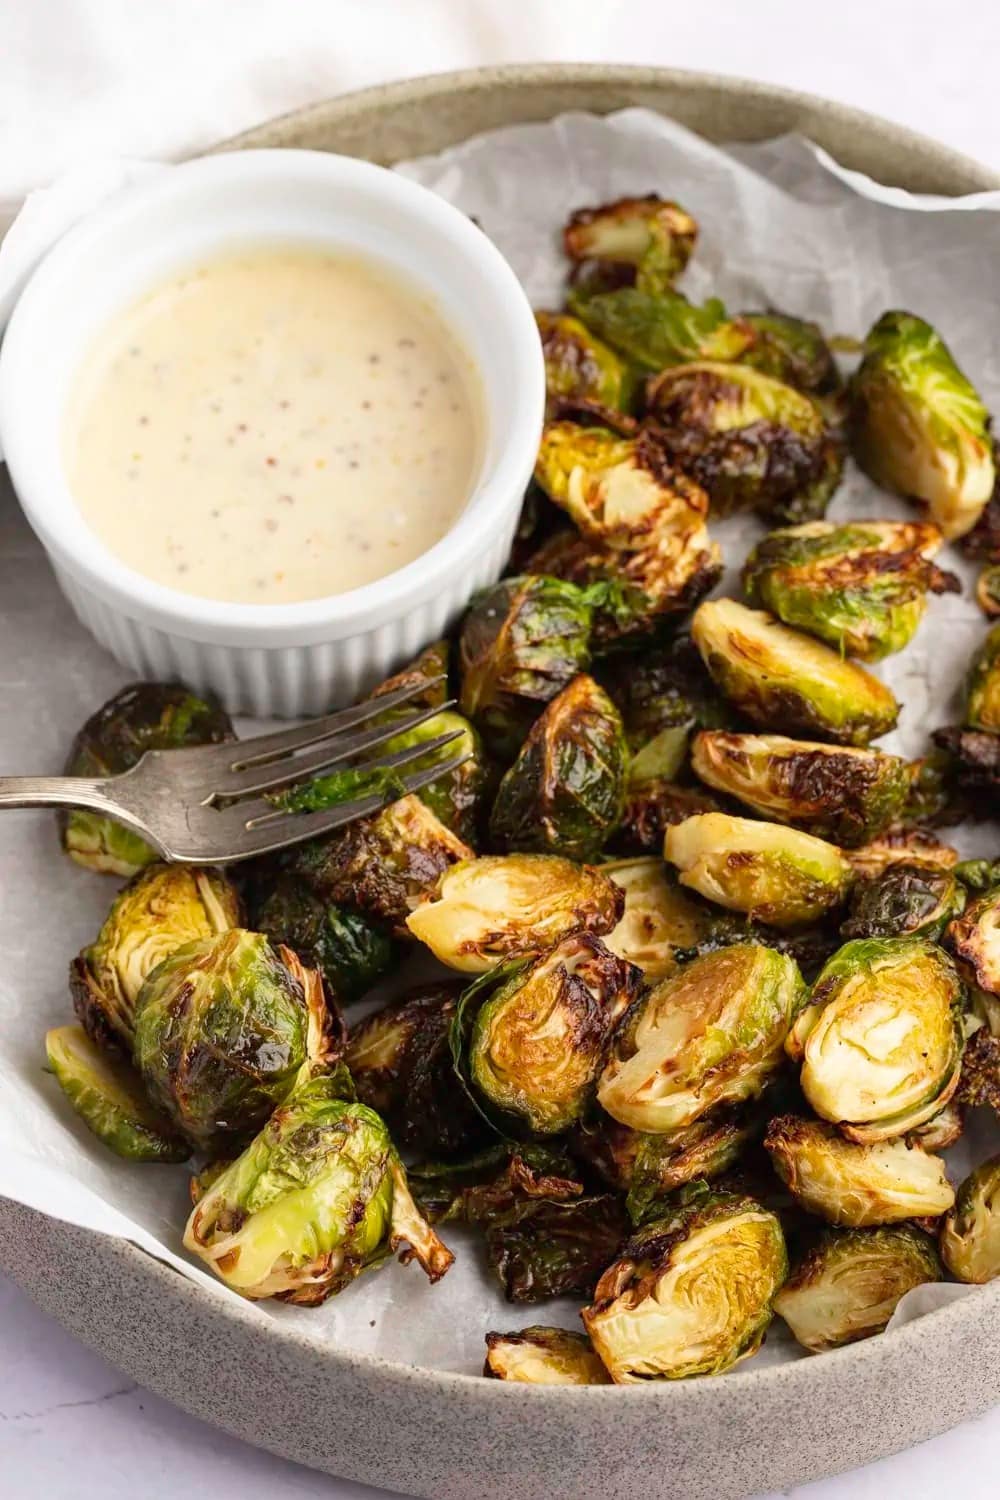 Platter of Roasted Brussels Sprouts with bowl of dipping sauce